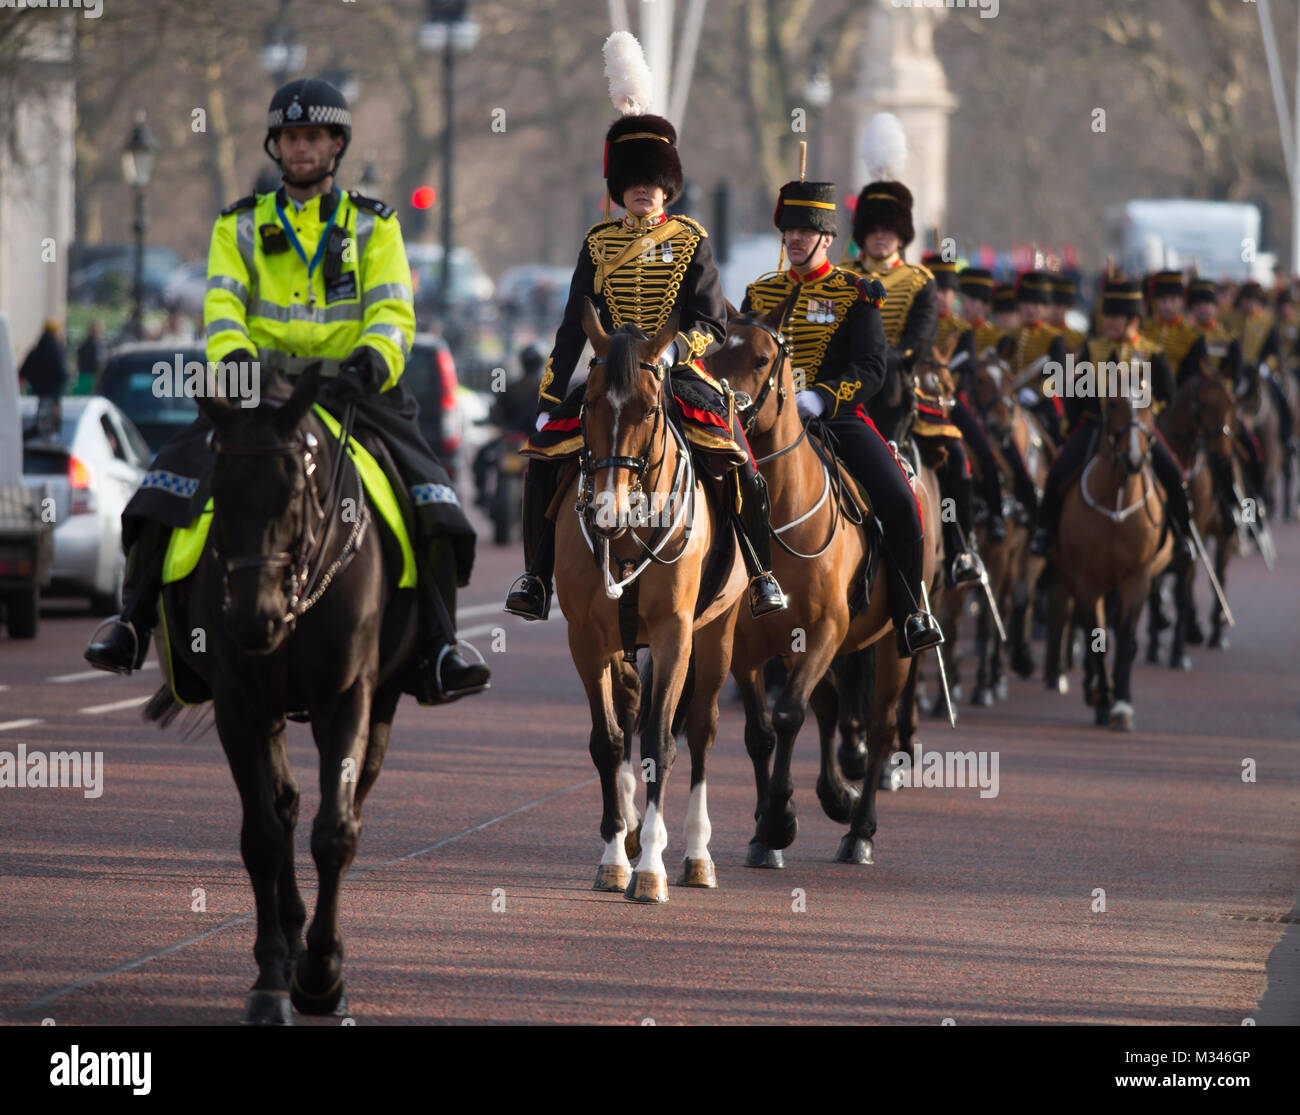 Constitution Hill, London, UK. 6 Feb 2018. The King’s Troop Royal Horse Artillery en route to Green Park to stage 41 gun salute. Stock Photo